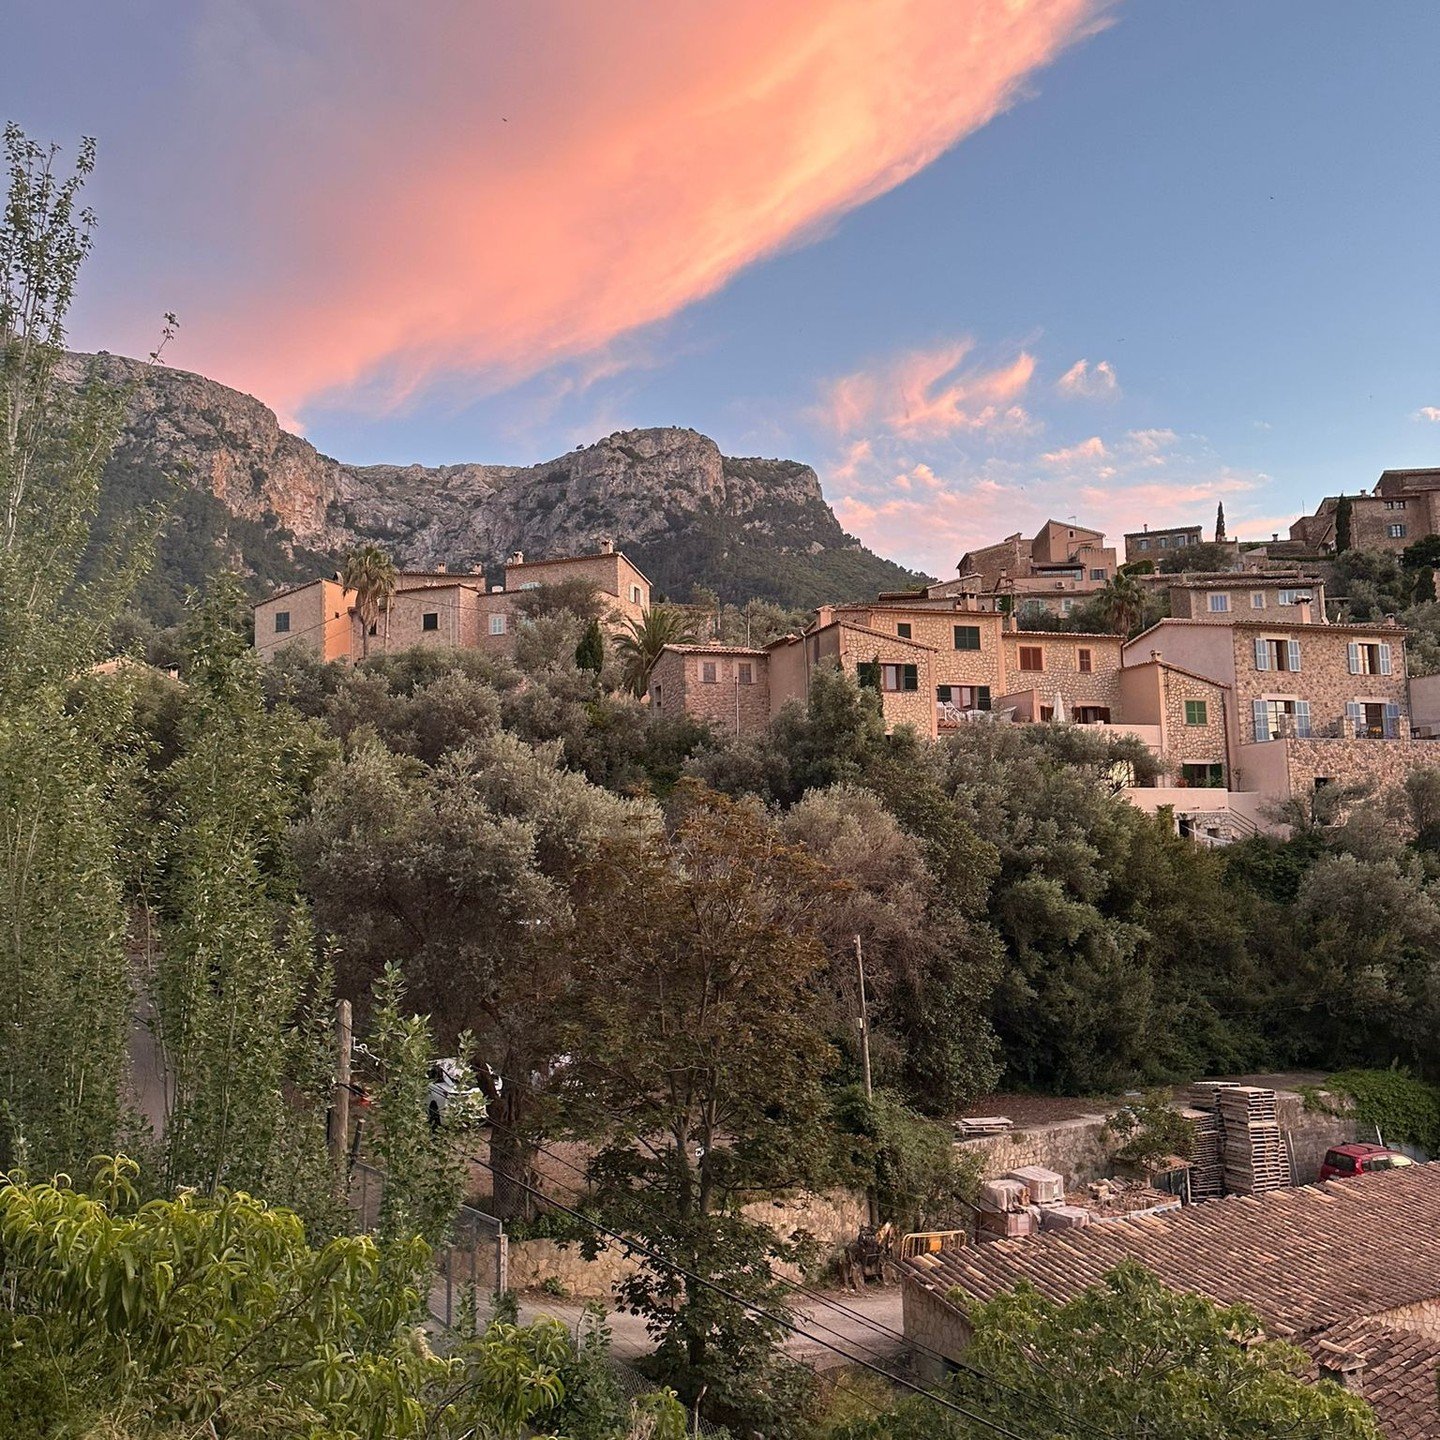 Beautiful skies, captured by our guests this week at our property, Sa Llupia in Deia, Mallorca. 

Comfortable temperatures of around 25 degrees and warm bright evenings, in the warm up to summer 

#luxuryvilla #luxurytraveller #deia #mallorca #tramun